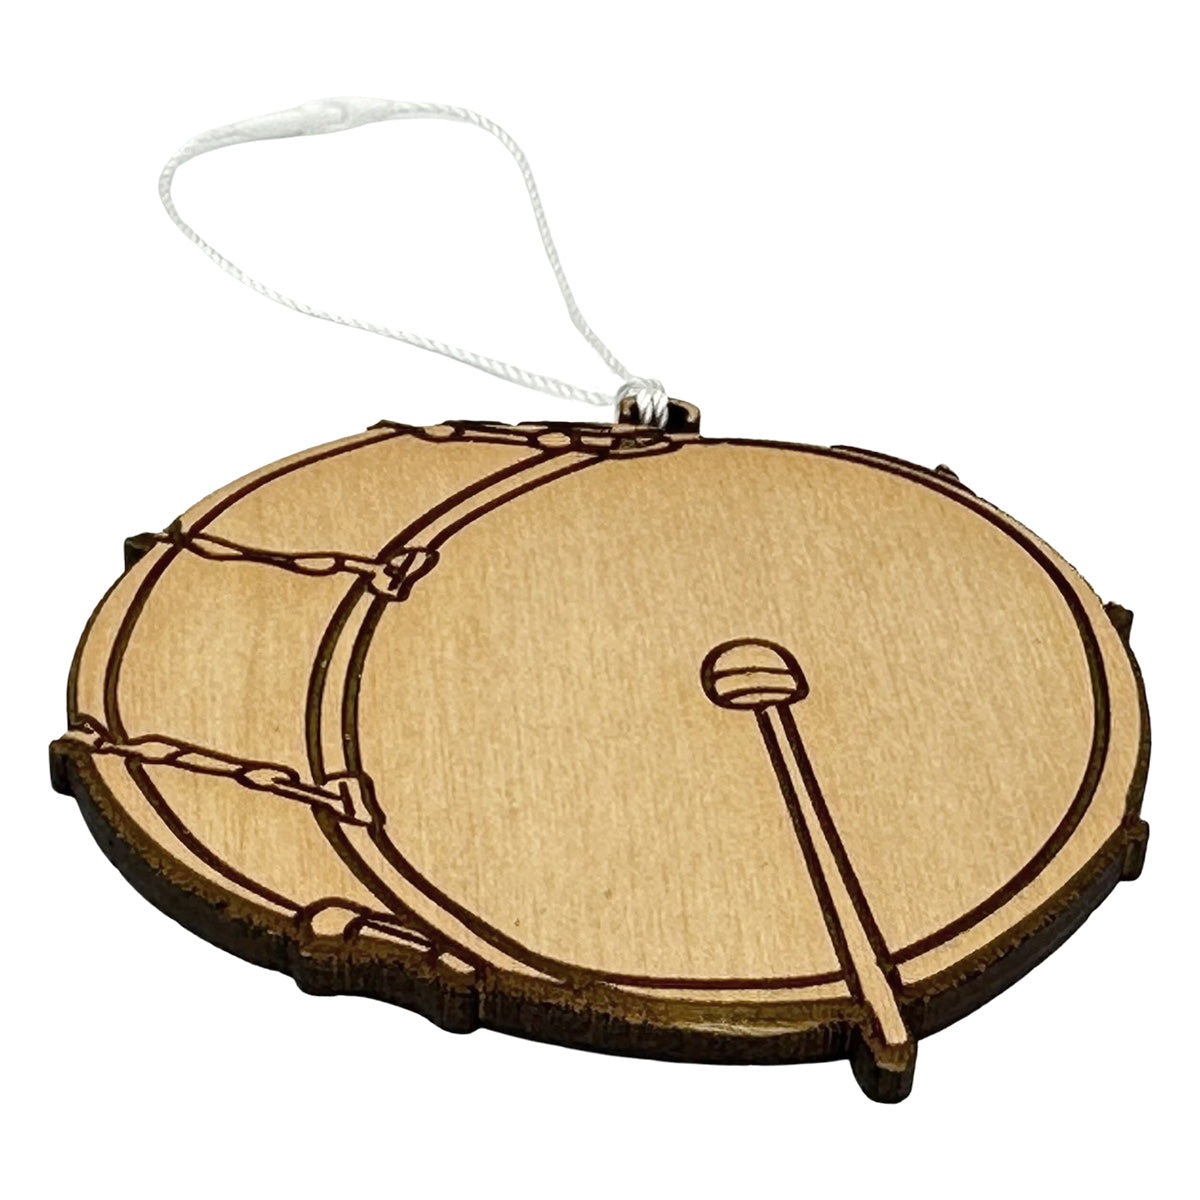 Bass Drum Engraved Wood Ornament